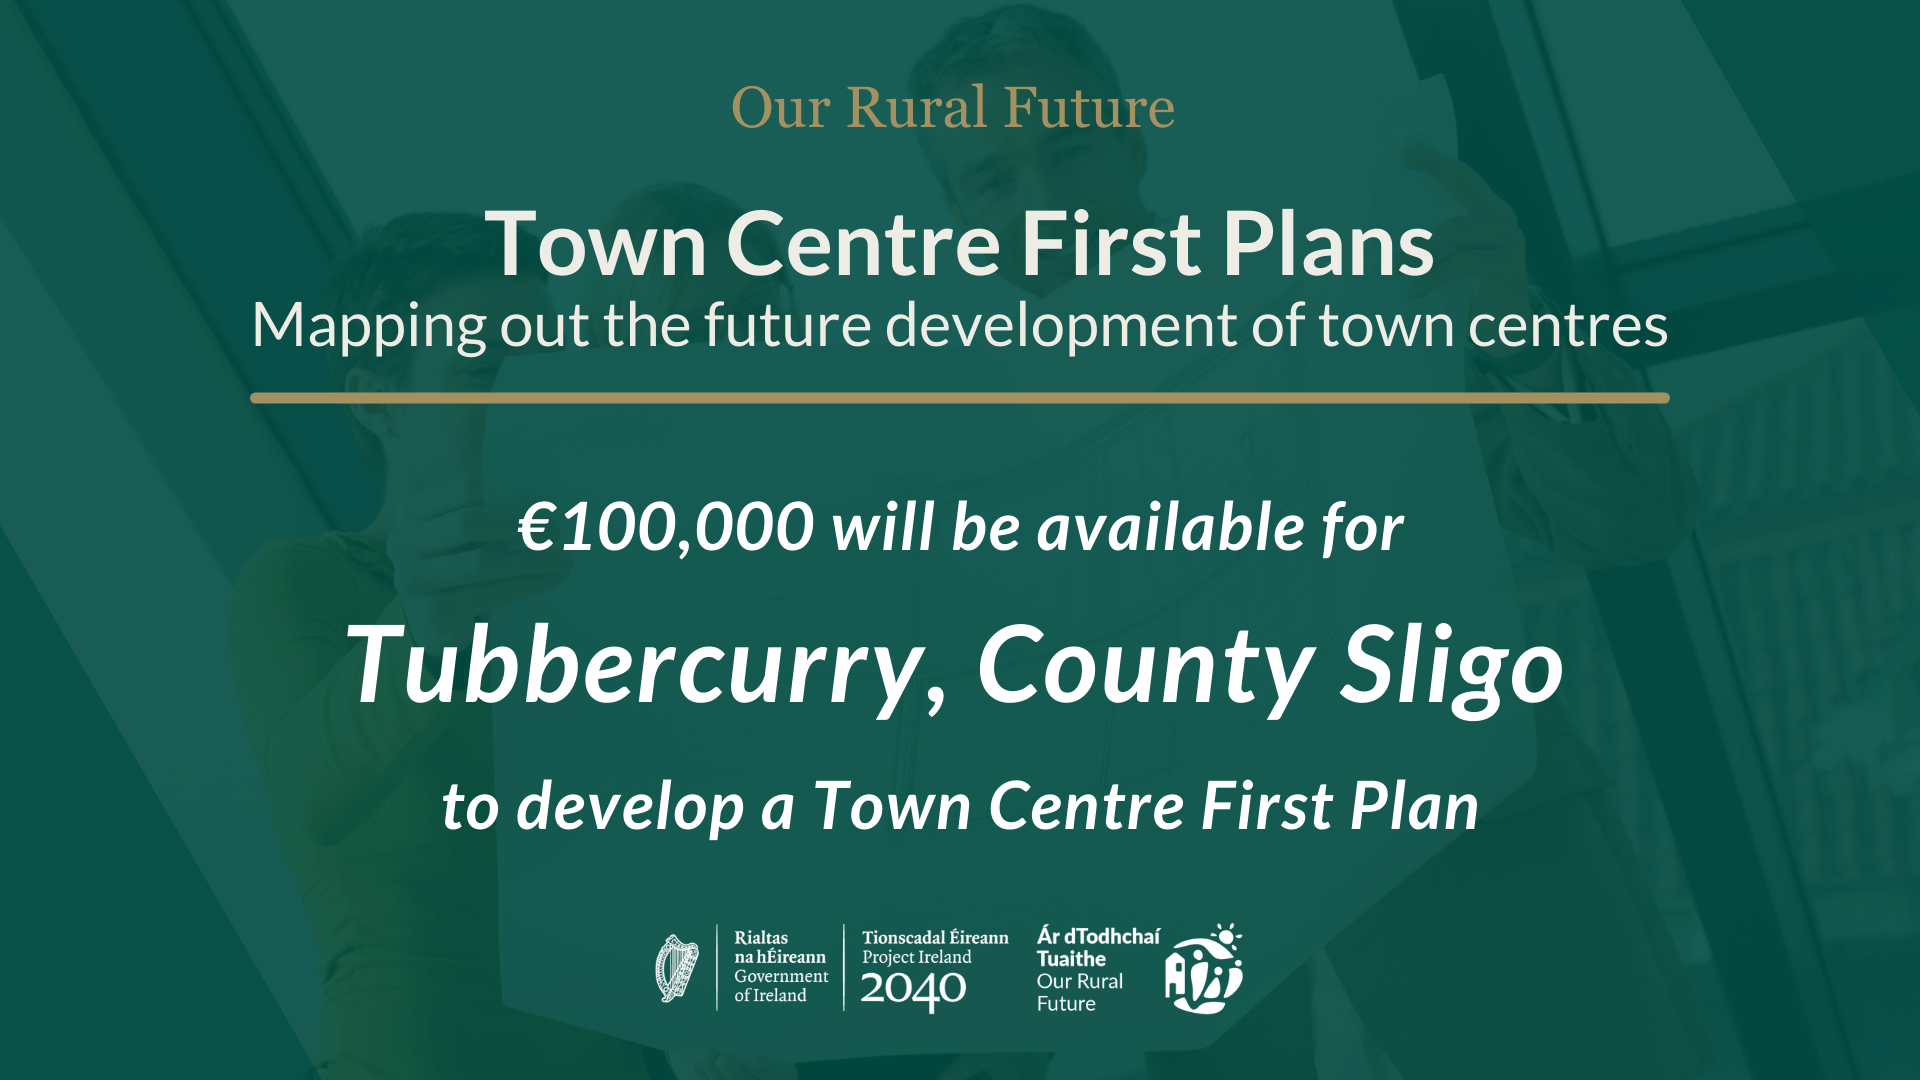 Our Rural Future: Minister Humphreys announces €2.6 million for the development of the first ever Town Centre First Plans